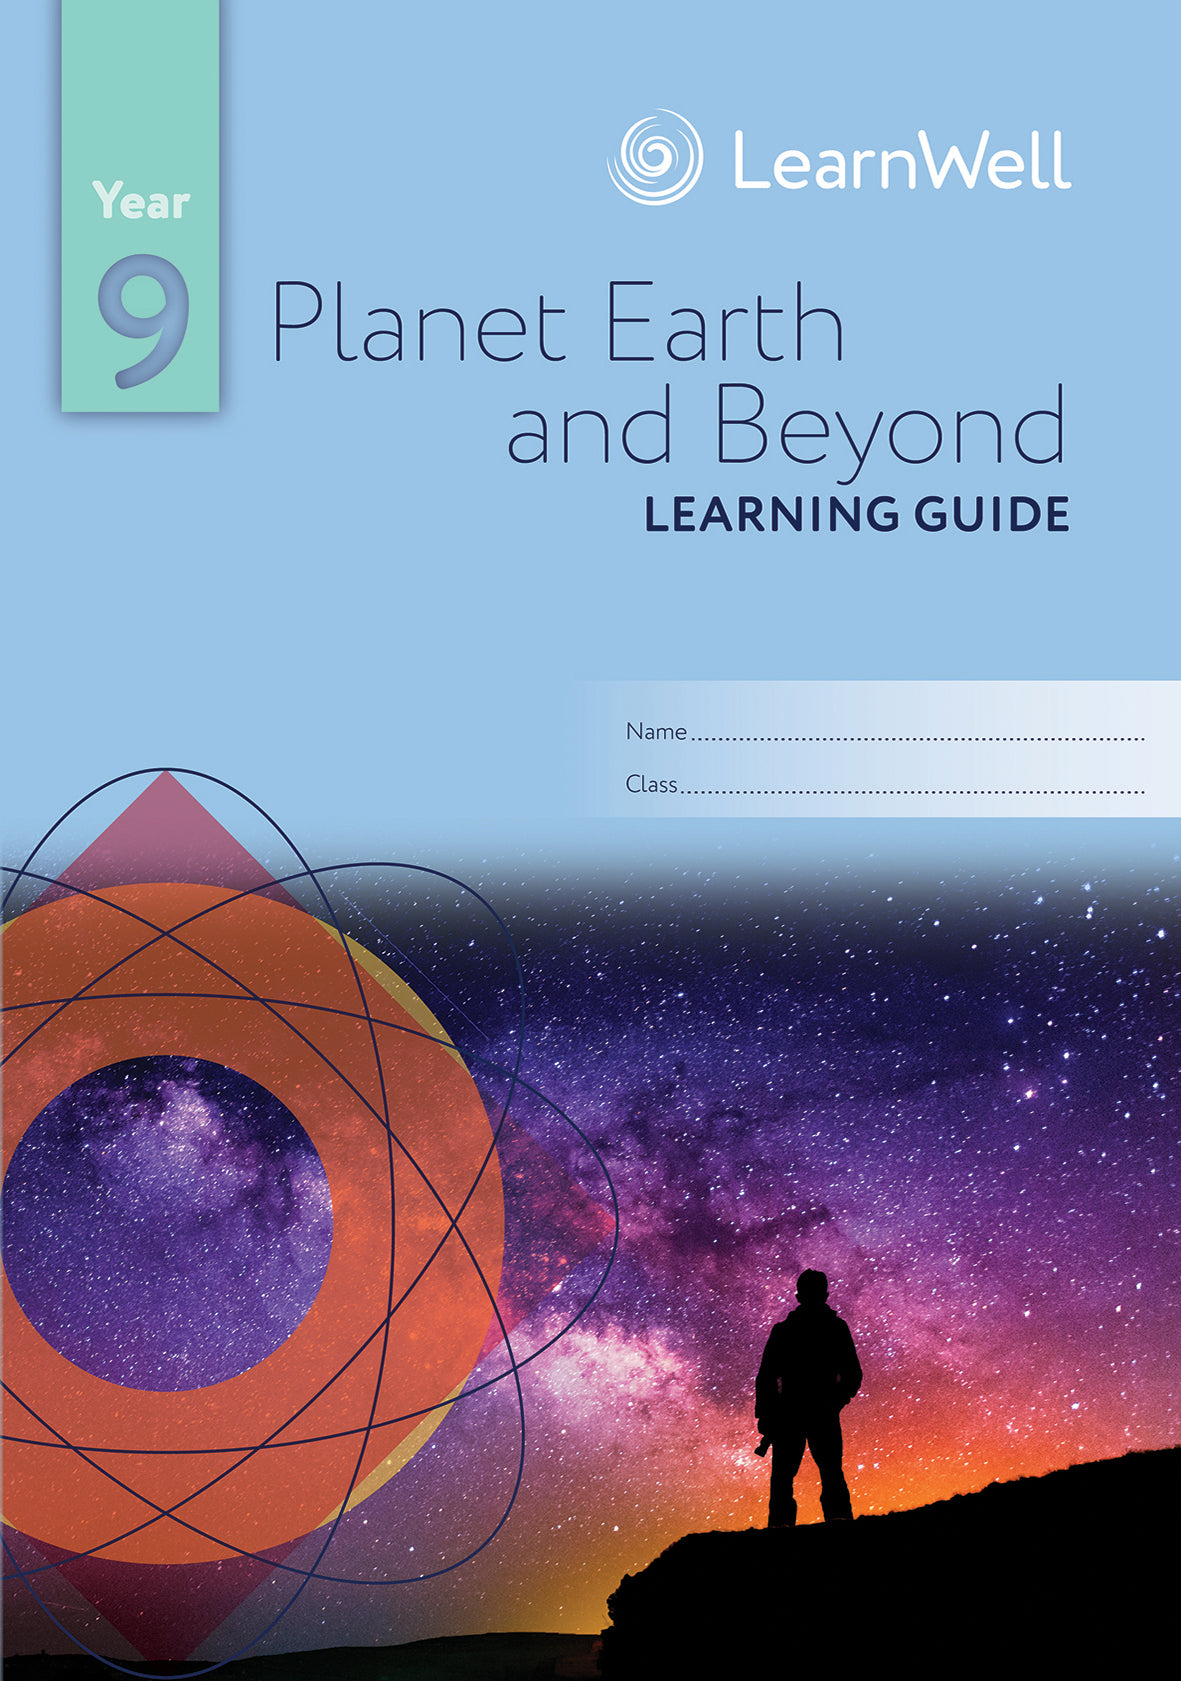 Year 9 Planet Earth and Beyond Learning Guide